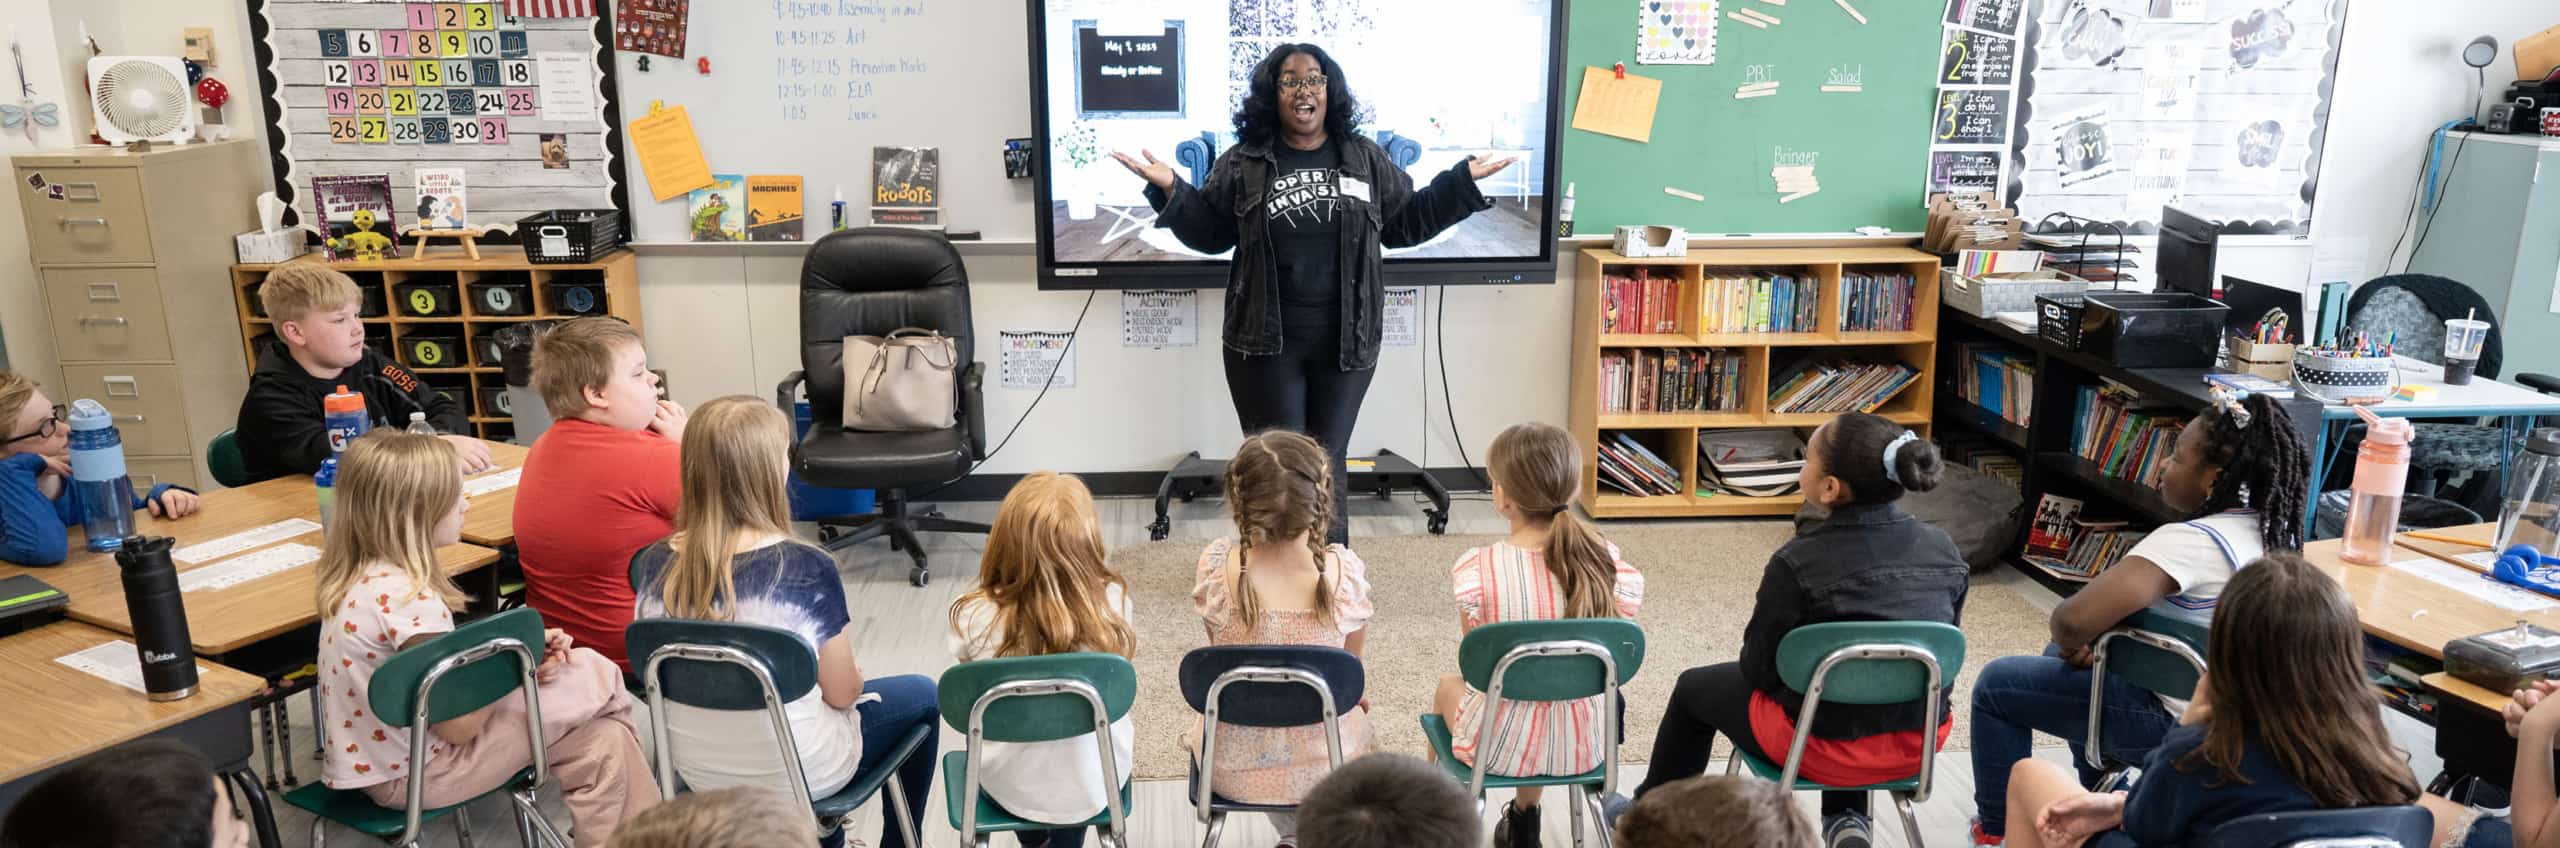 An opera singer engaging with a classroom of kids